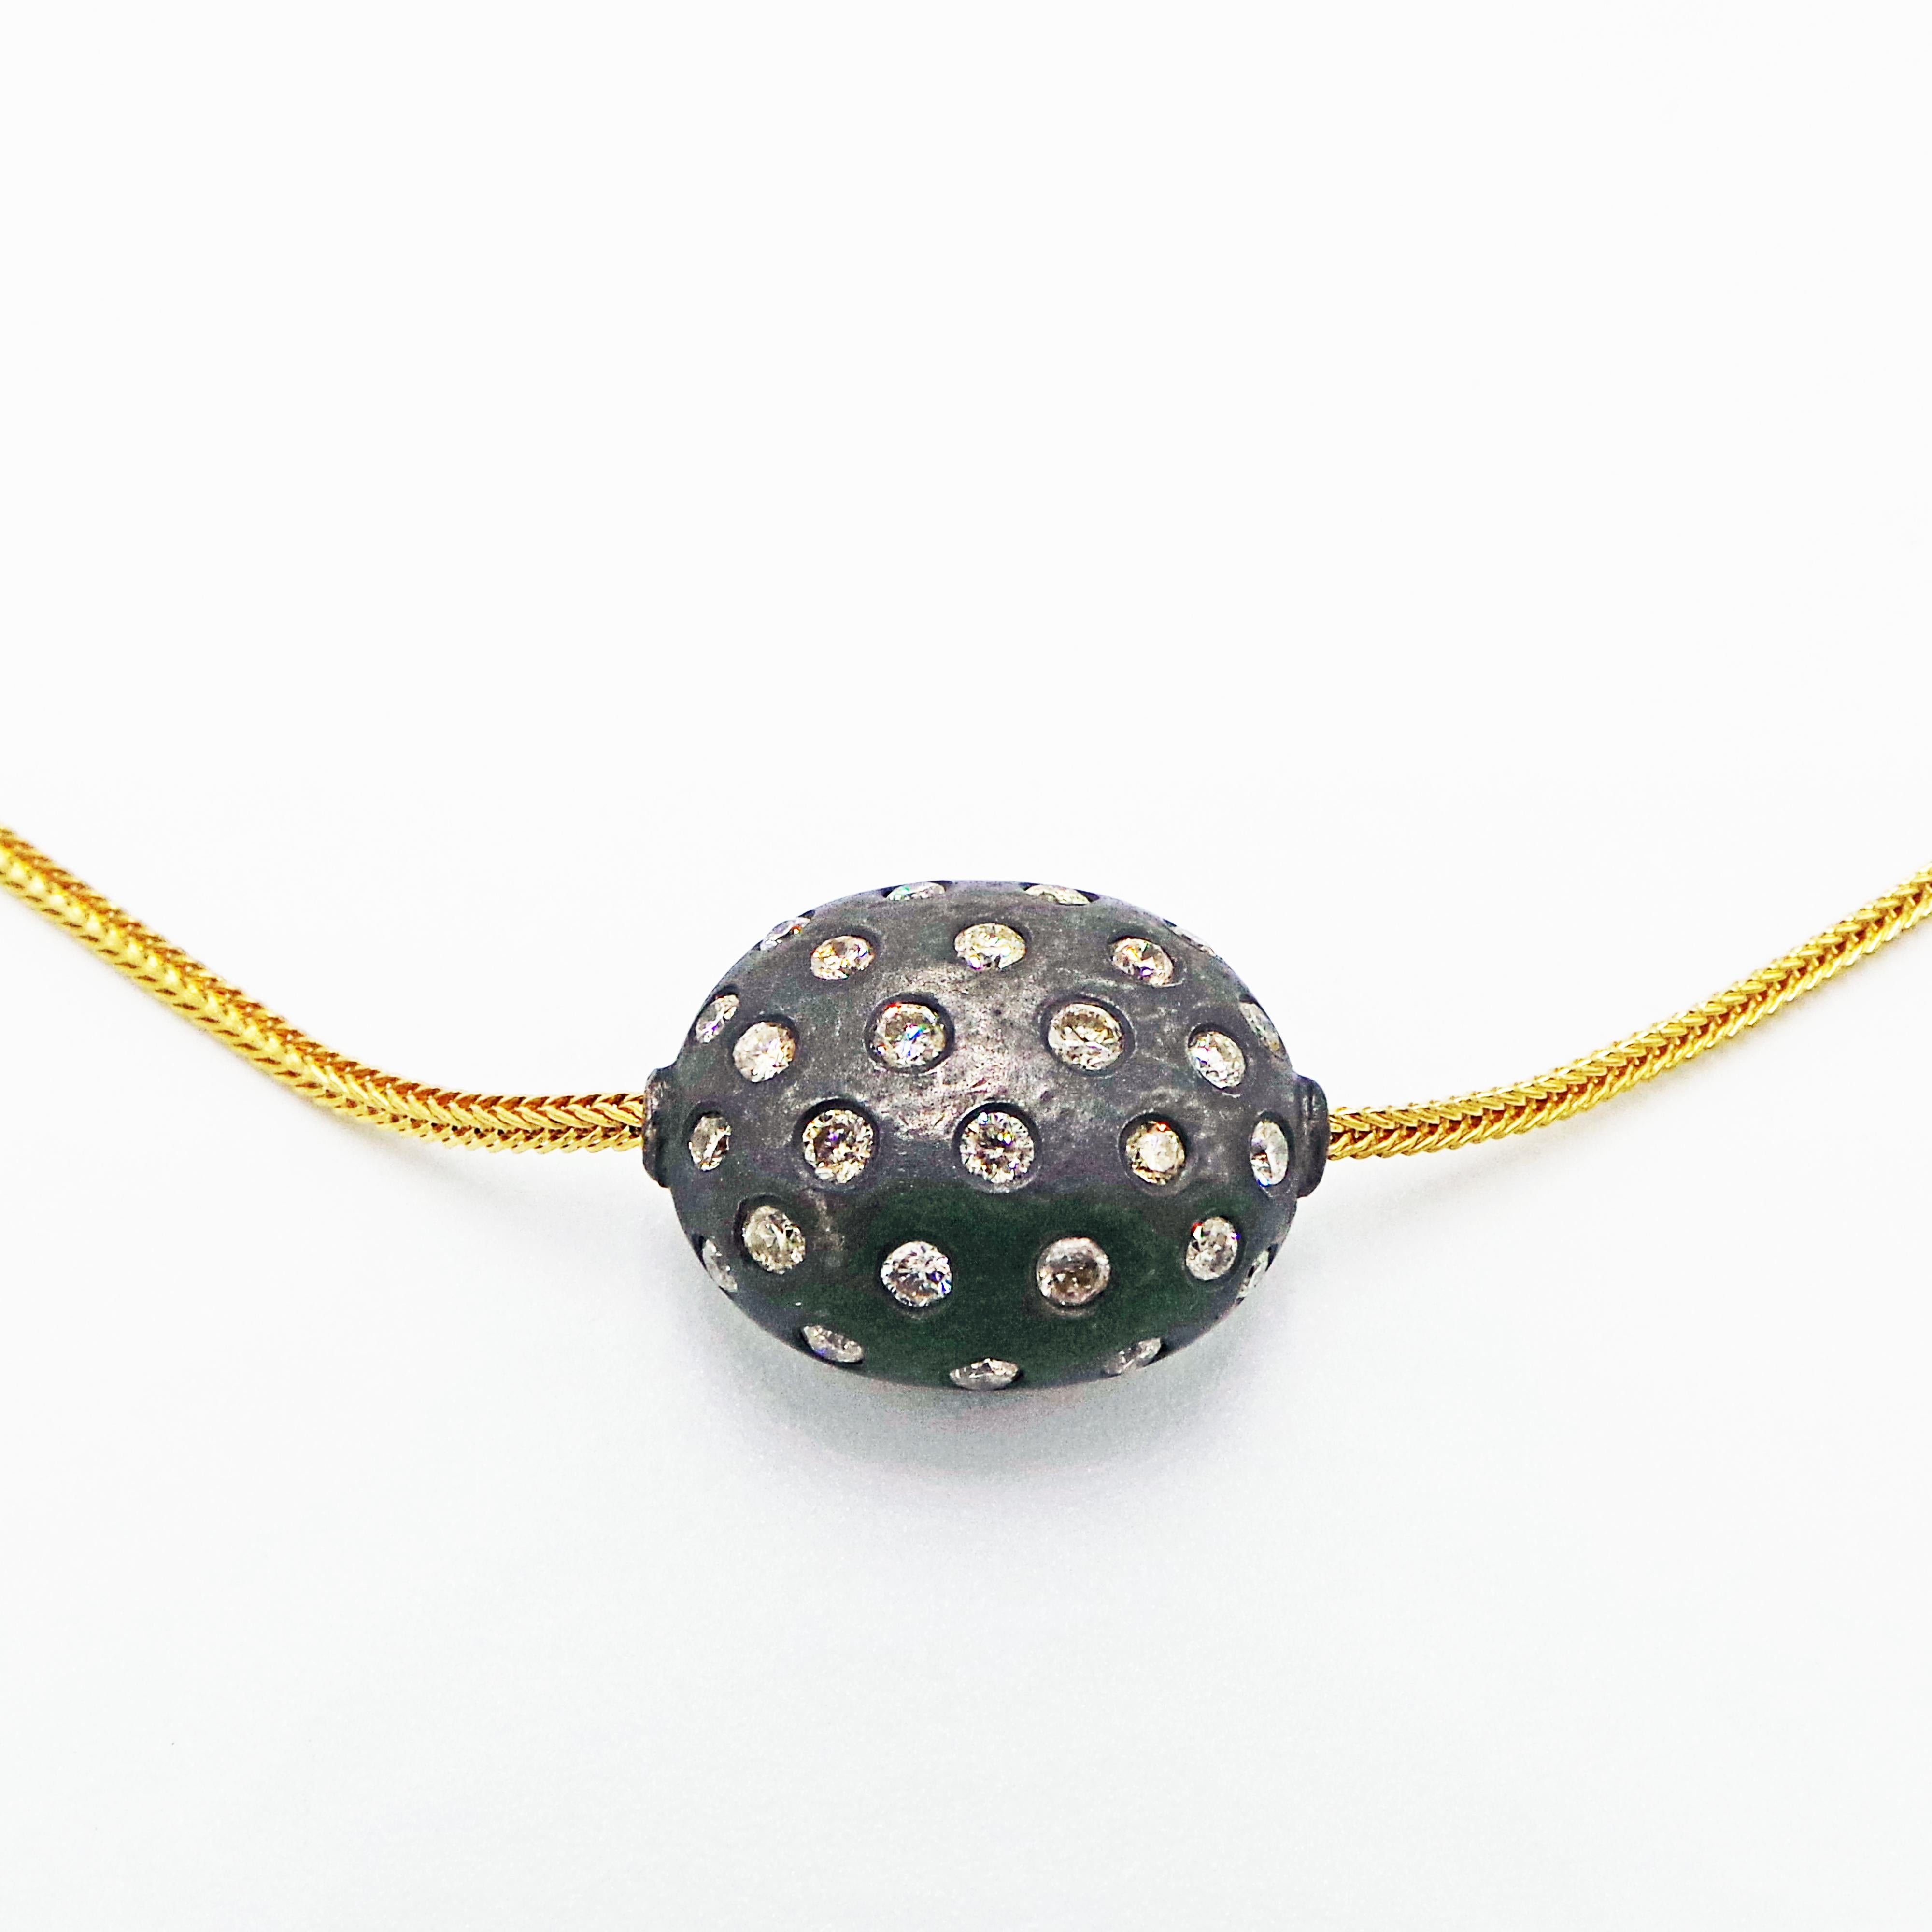 Necklace:  Large multi-diamond pavé oxidized sterling silver ball bead on 18k yellow gold foxtail chain.
Earrings:  Small multi-diamond pavé oxidized sterling silver bead on 18k yellow gold french wires.

This necklace and earring set is versatile,